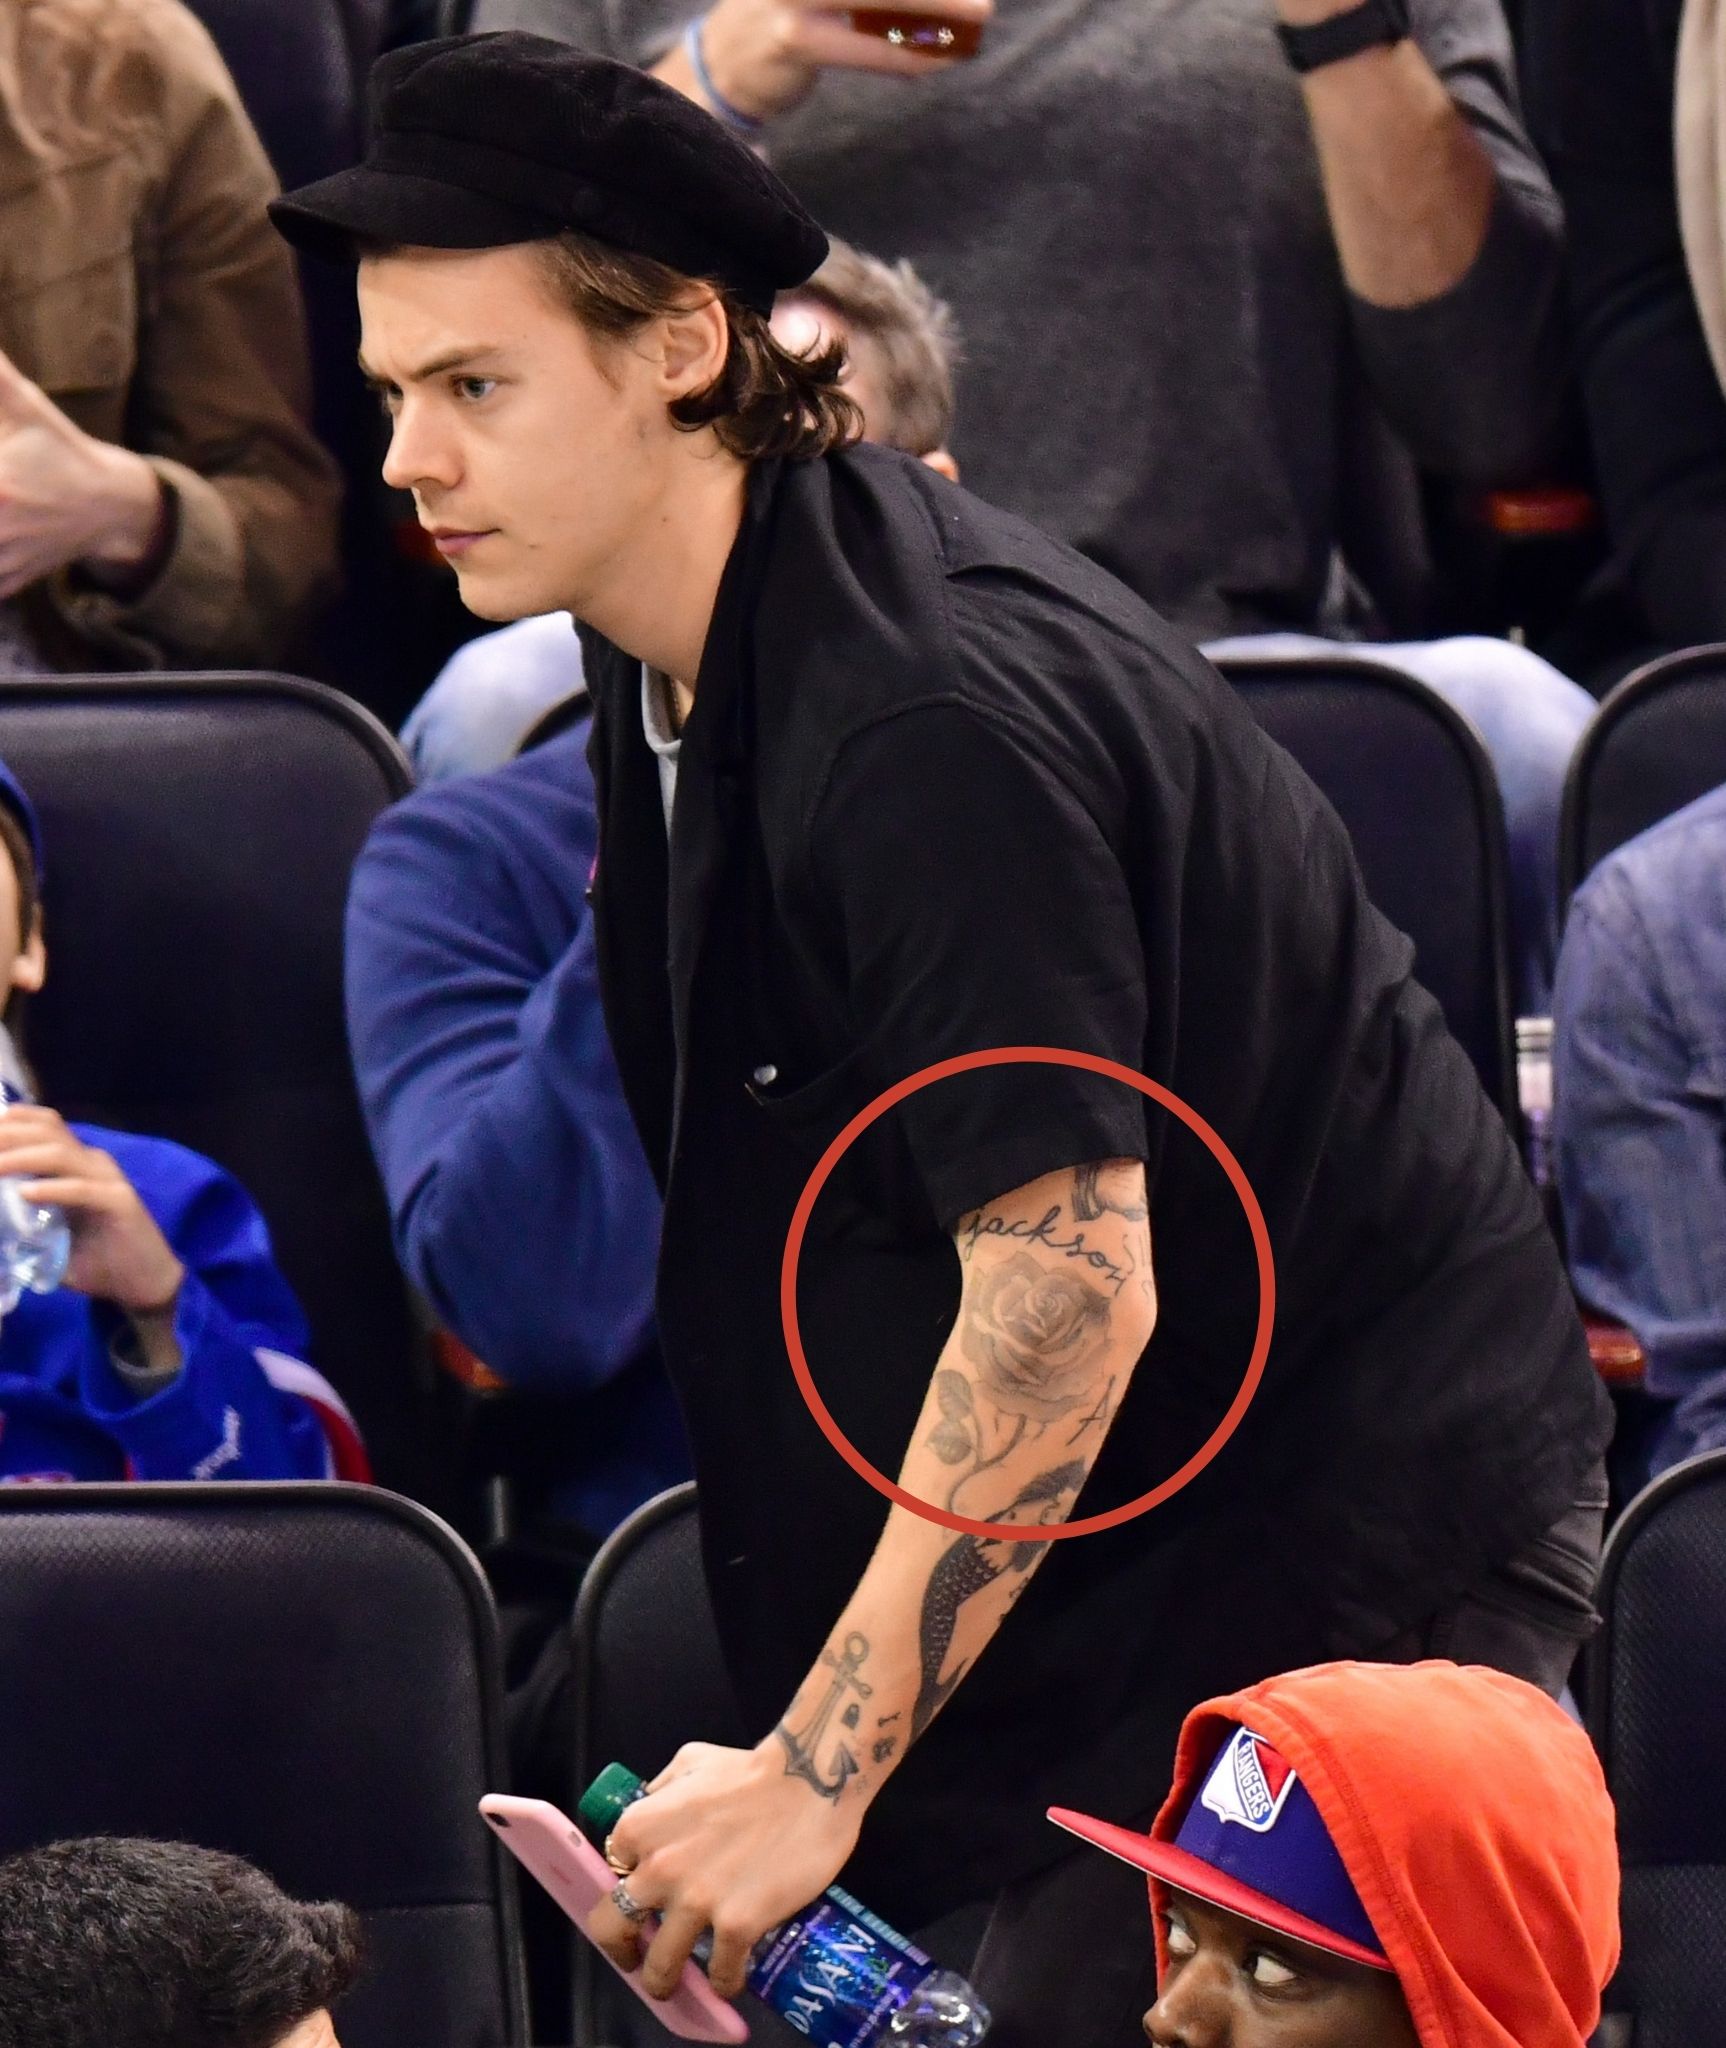 Susanna Reid mistakes Harry Styles tattoos for part of his Grammys outfit   The Independent